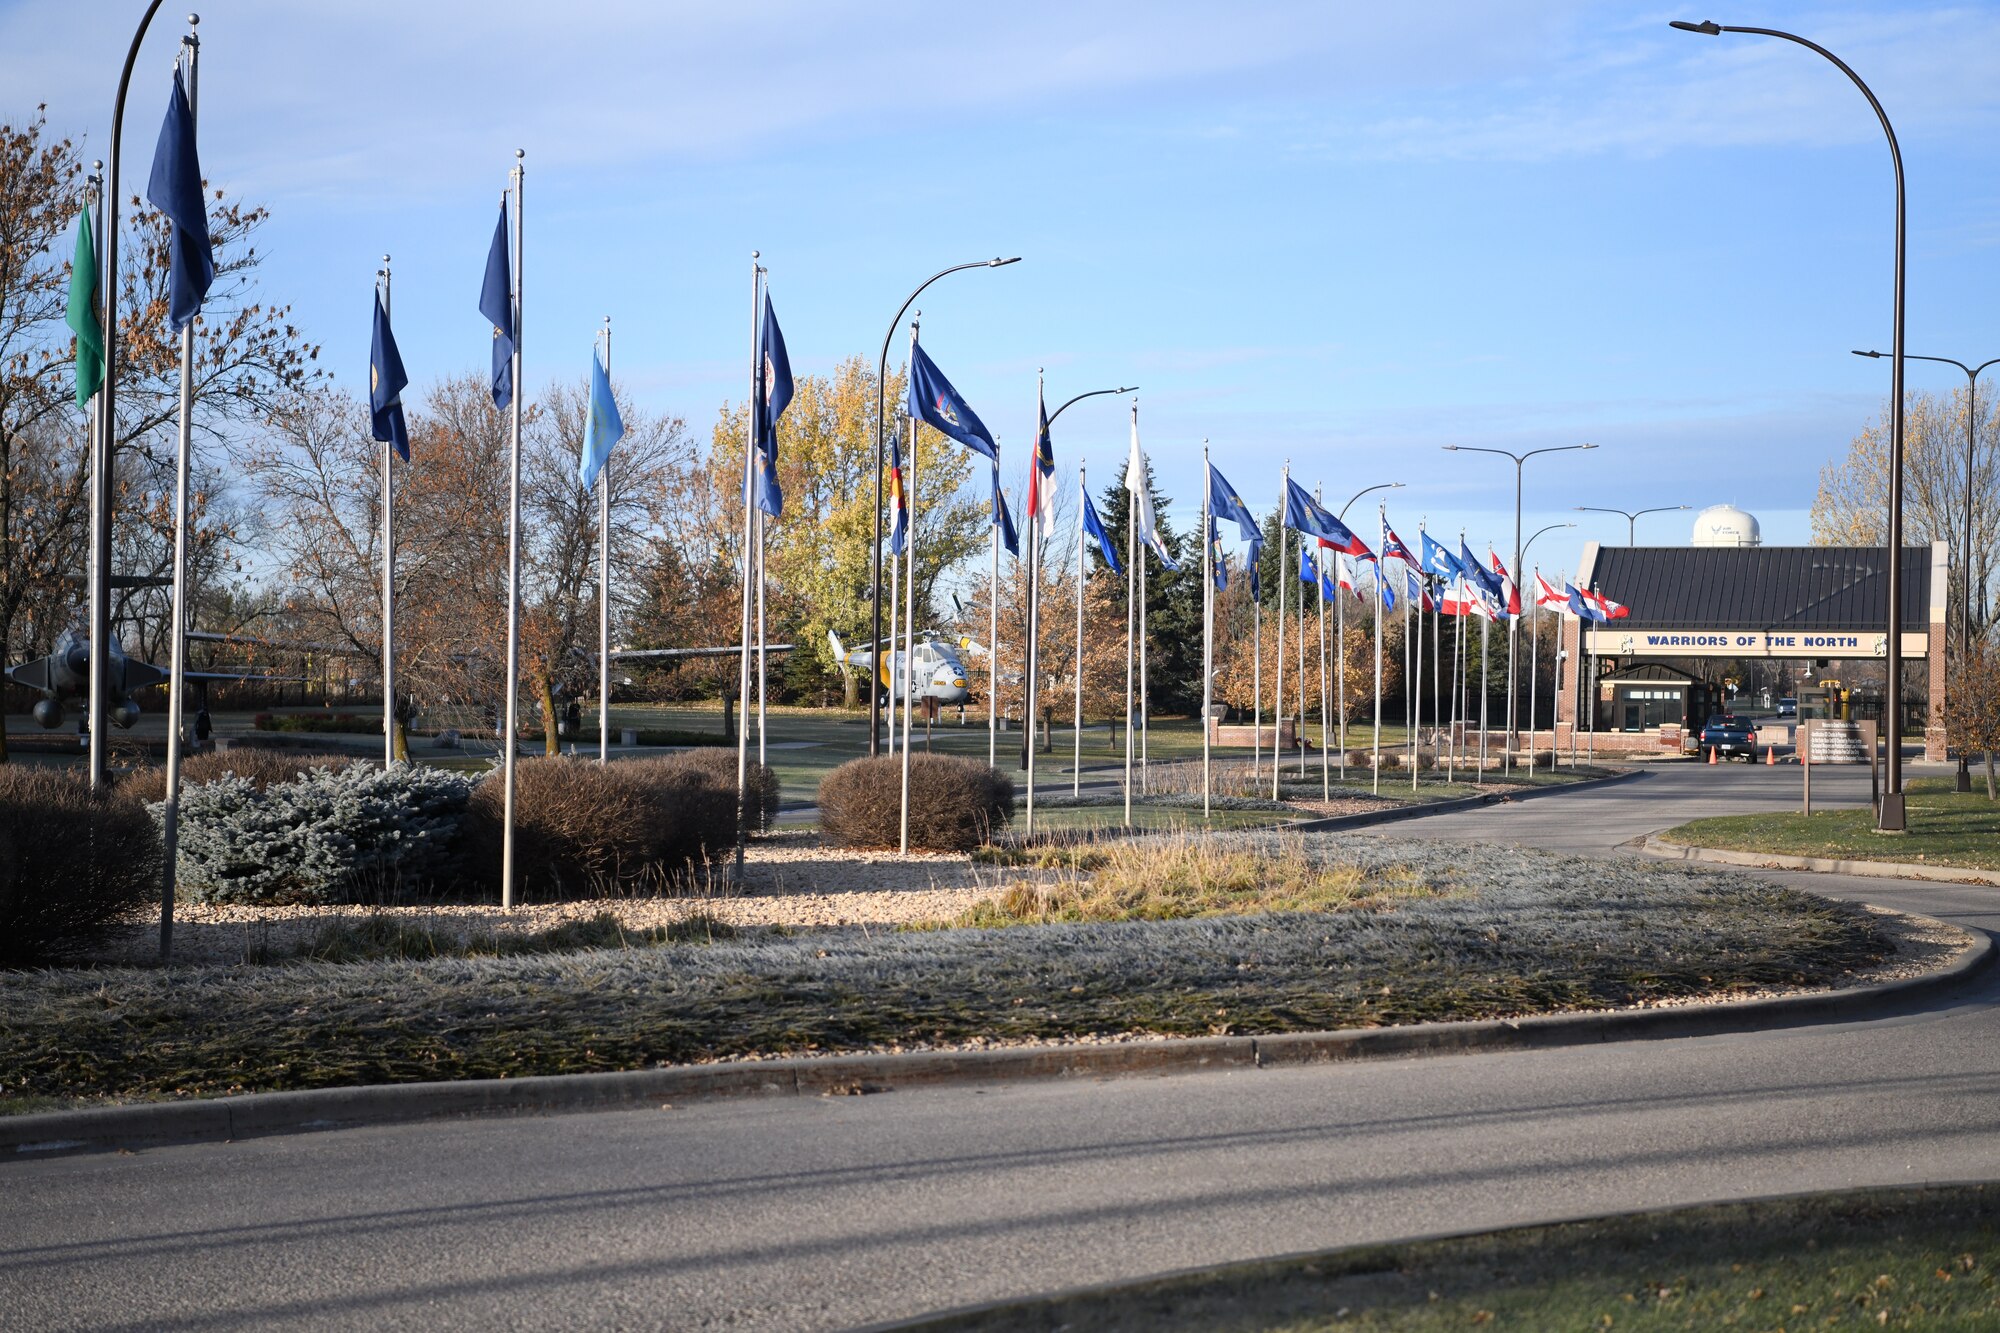 State flags lead up to the main gate of Grand Forks Air Force Base, North Dakota, Oct. 31, 2019. The base is home to the 319th Reconnaissance Wing, which was re-designated from the 319th Air Base Wing in June of 2019. (U.S. Air Force photo by Airman 1st Class Brody Katka)